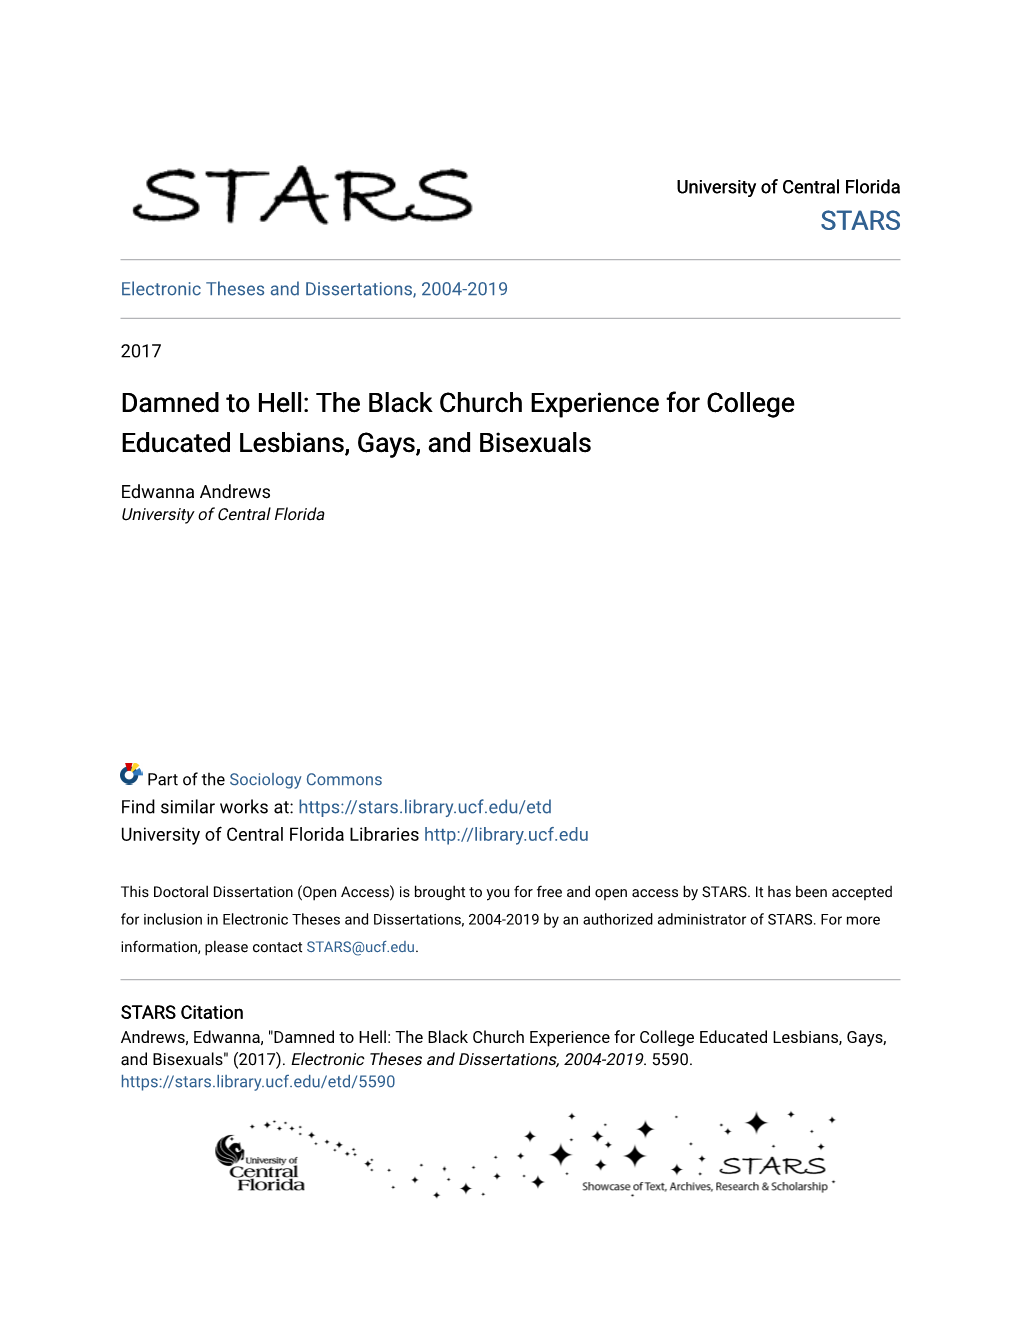 The Black Church Experience for College Educated Lesbians, Gays, and Bisexuals